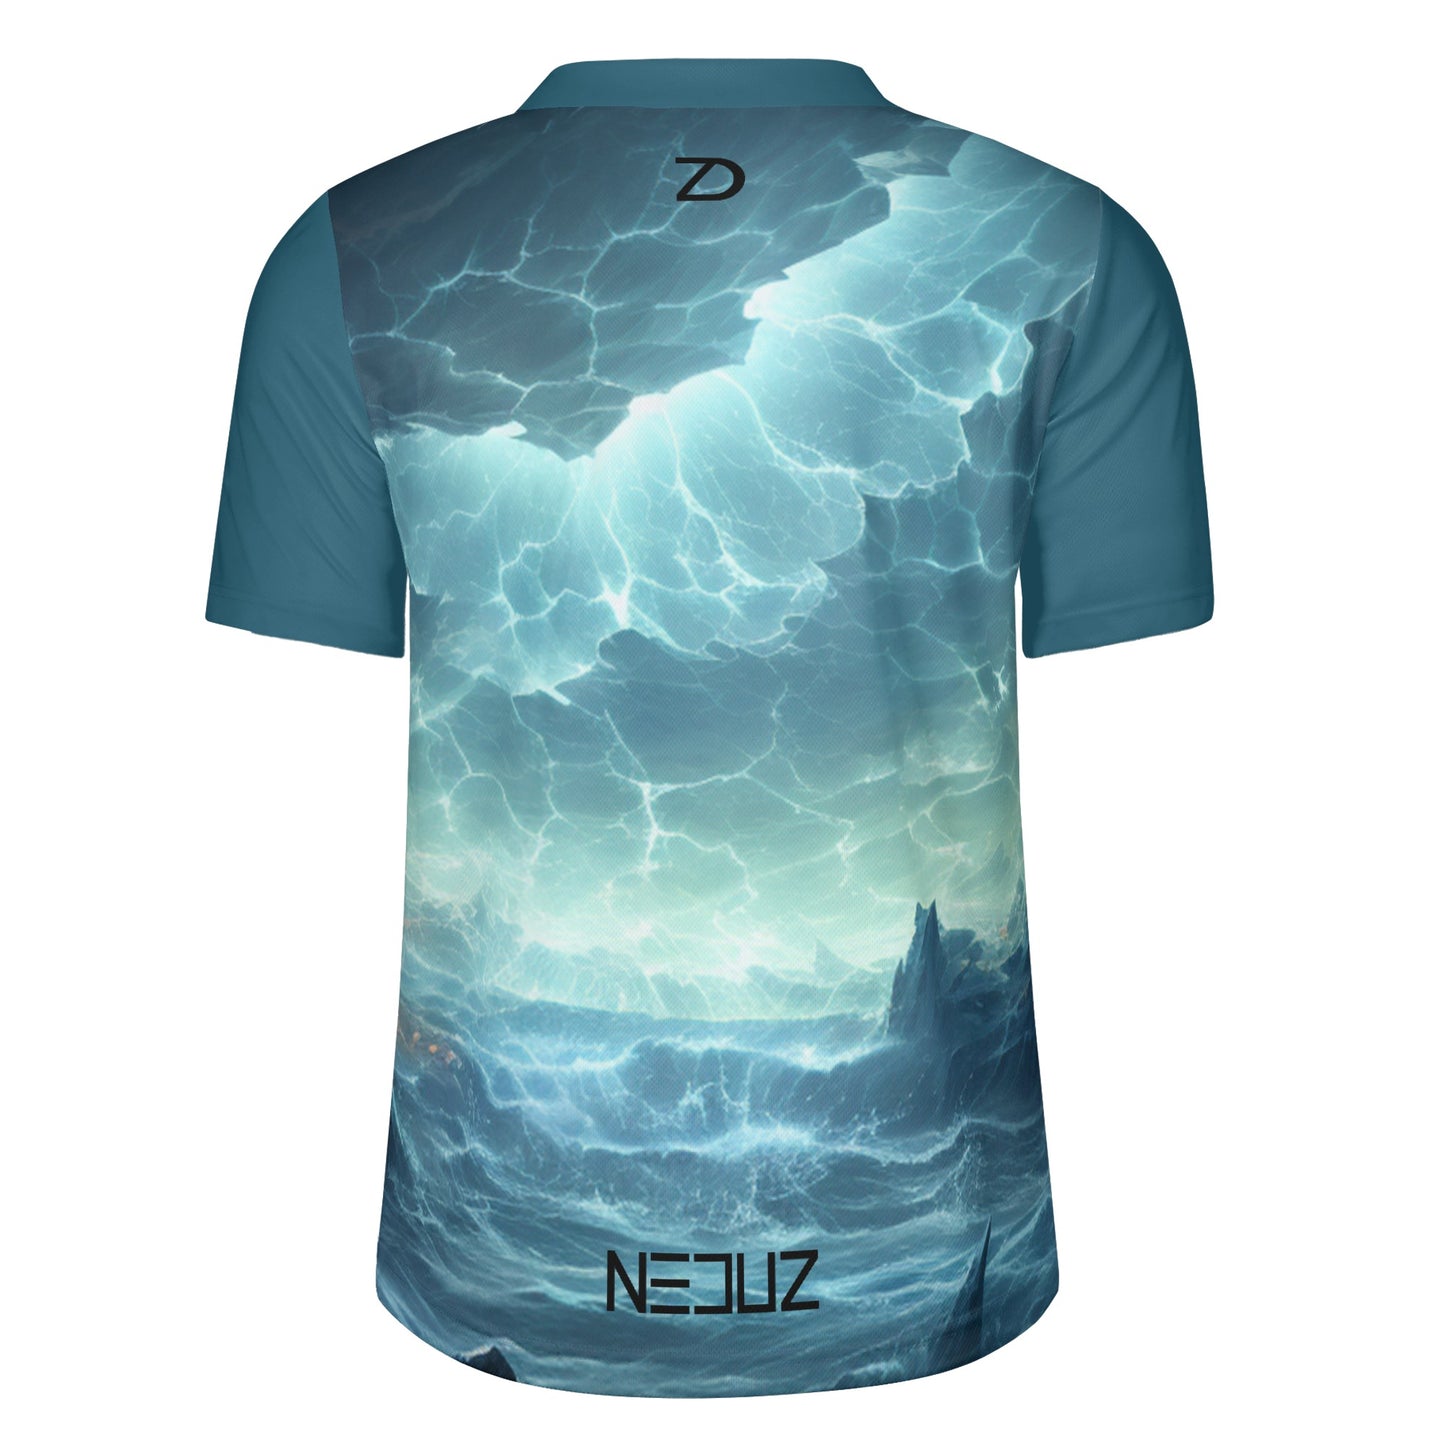 Neduz Mens Oceanic Workout Jersey - Lightweight and Breathable Short Sleeve V-Neck Shirt for Sports, Daily Wear, and More